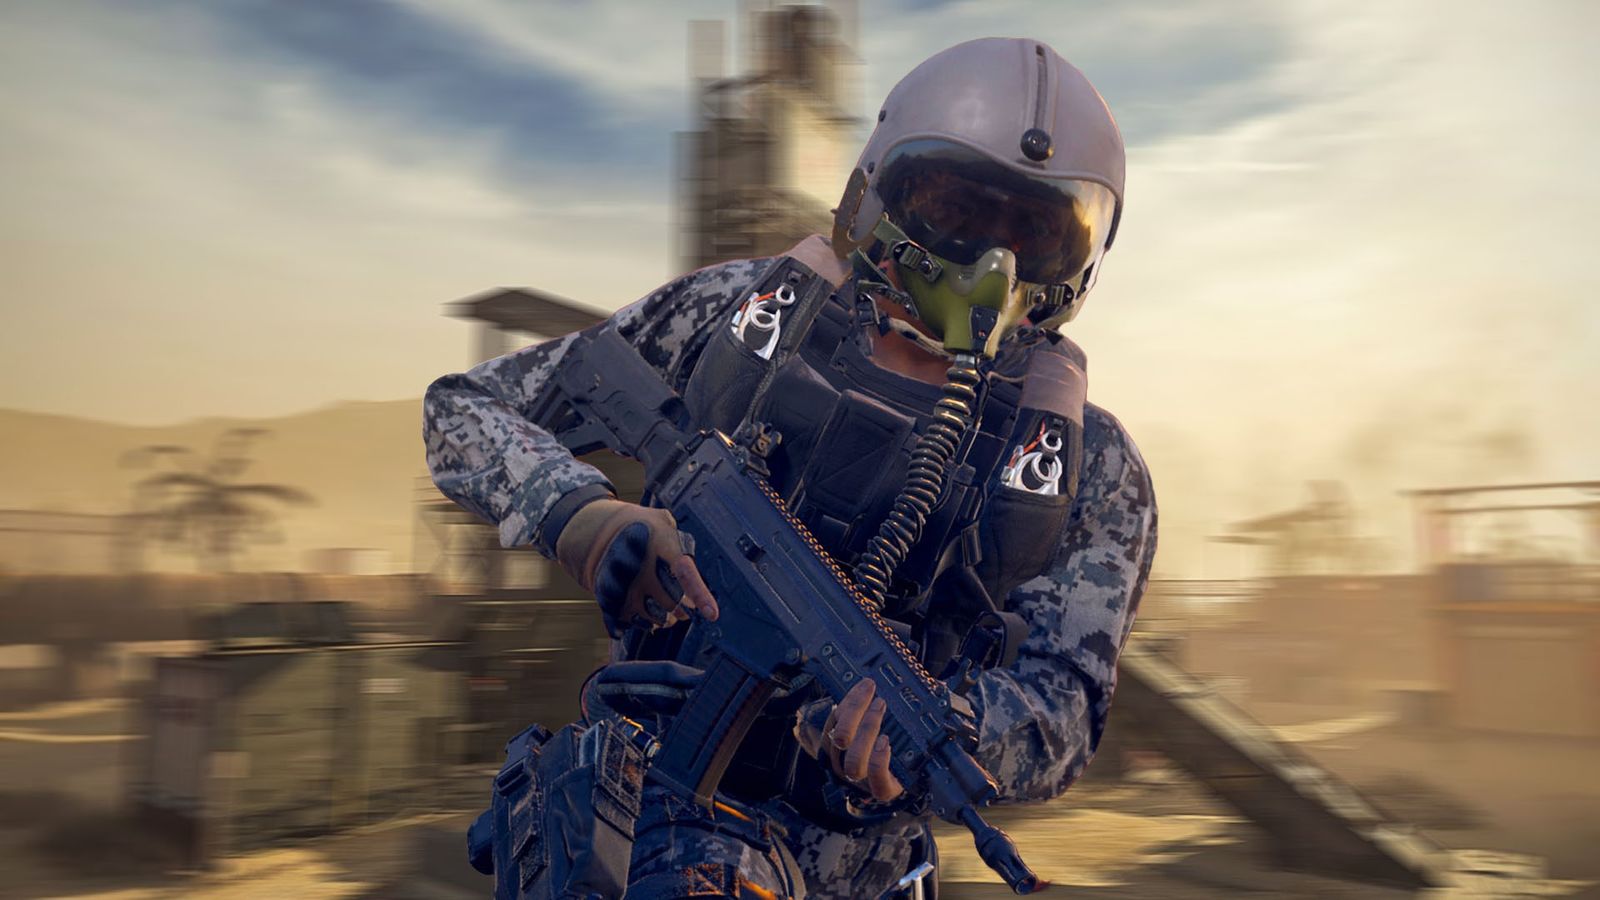 Modern Warfare 3 player holding assault rifle with blurred Rust map in background